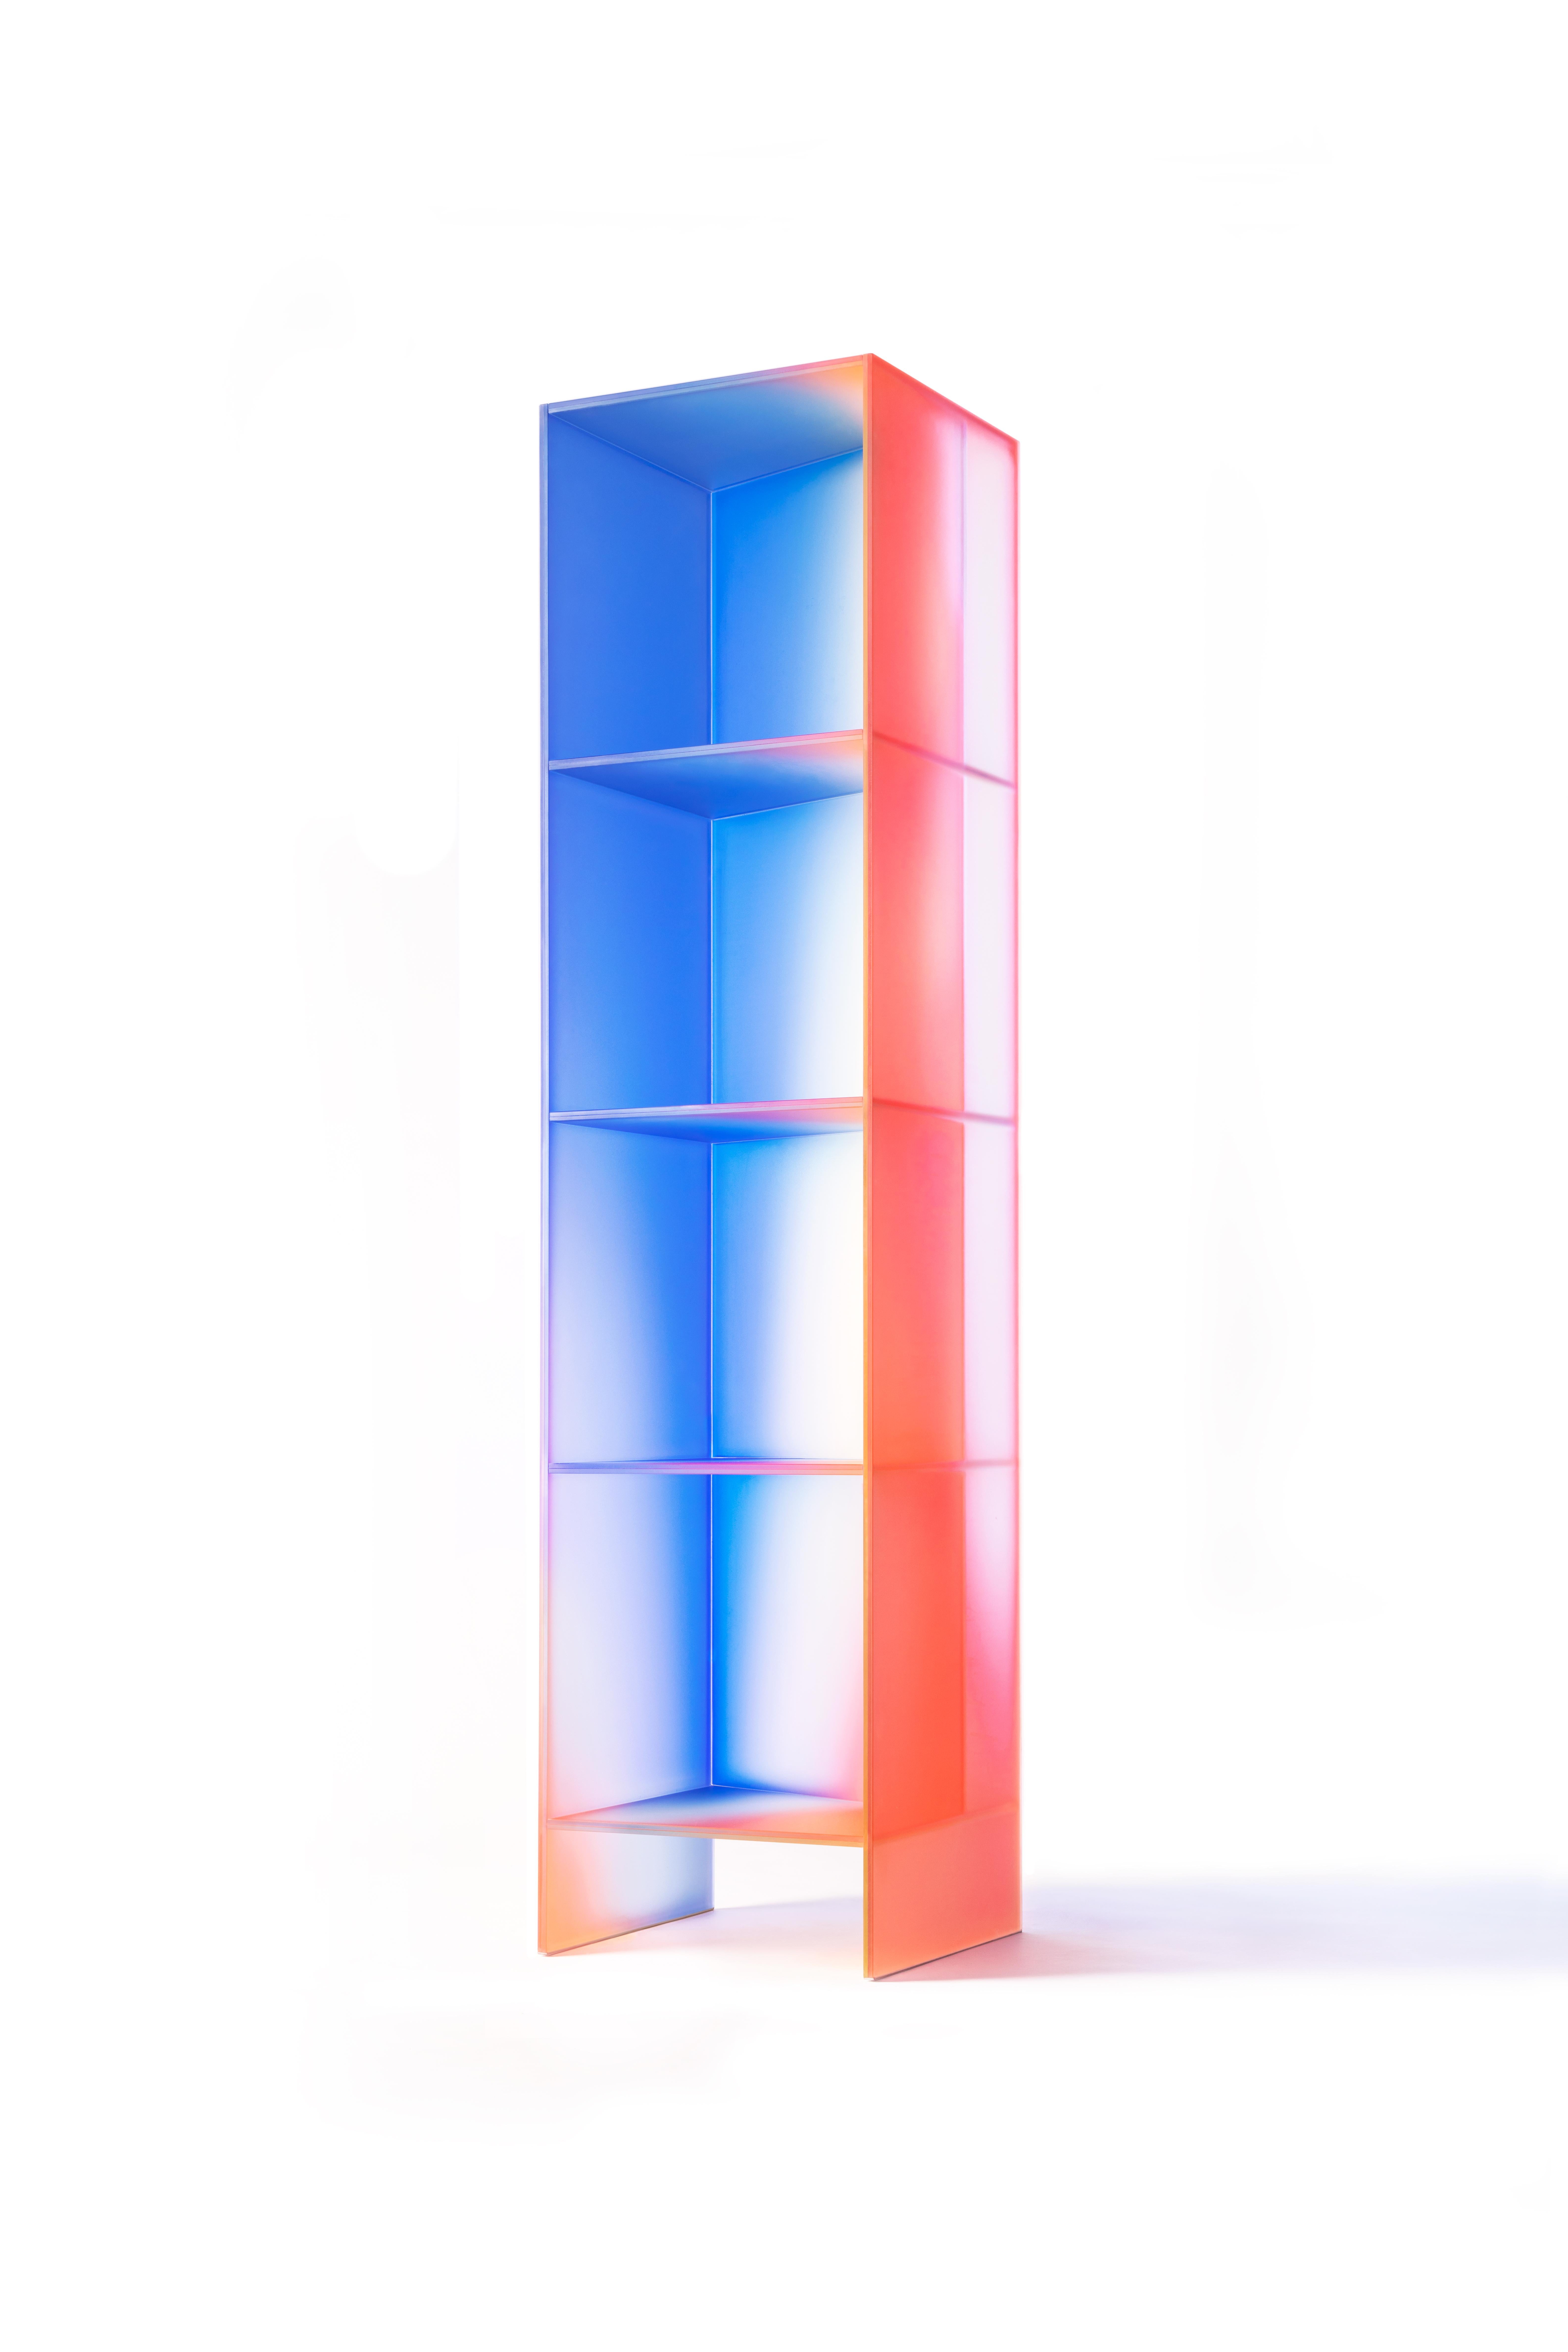 'HALO' collection by Buzao - Bookcase or shelves
Laminated dichroic glass, gradient colors 
42 x 40 x H 180 cm

Studio Buzao from Guangzhou (China) is exploring innovation with furniture and lighting design. From marble to lava stone, from